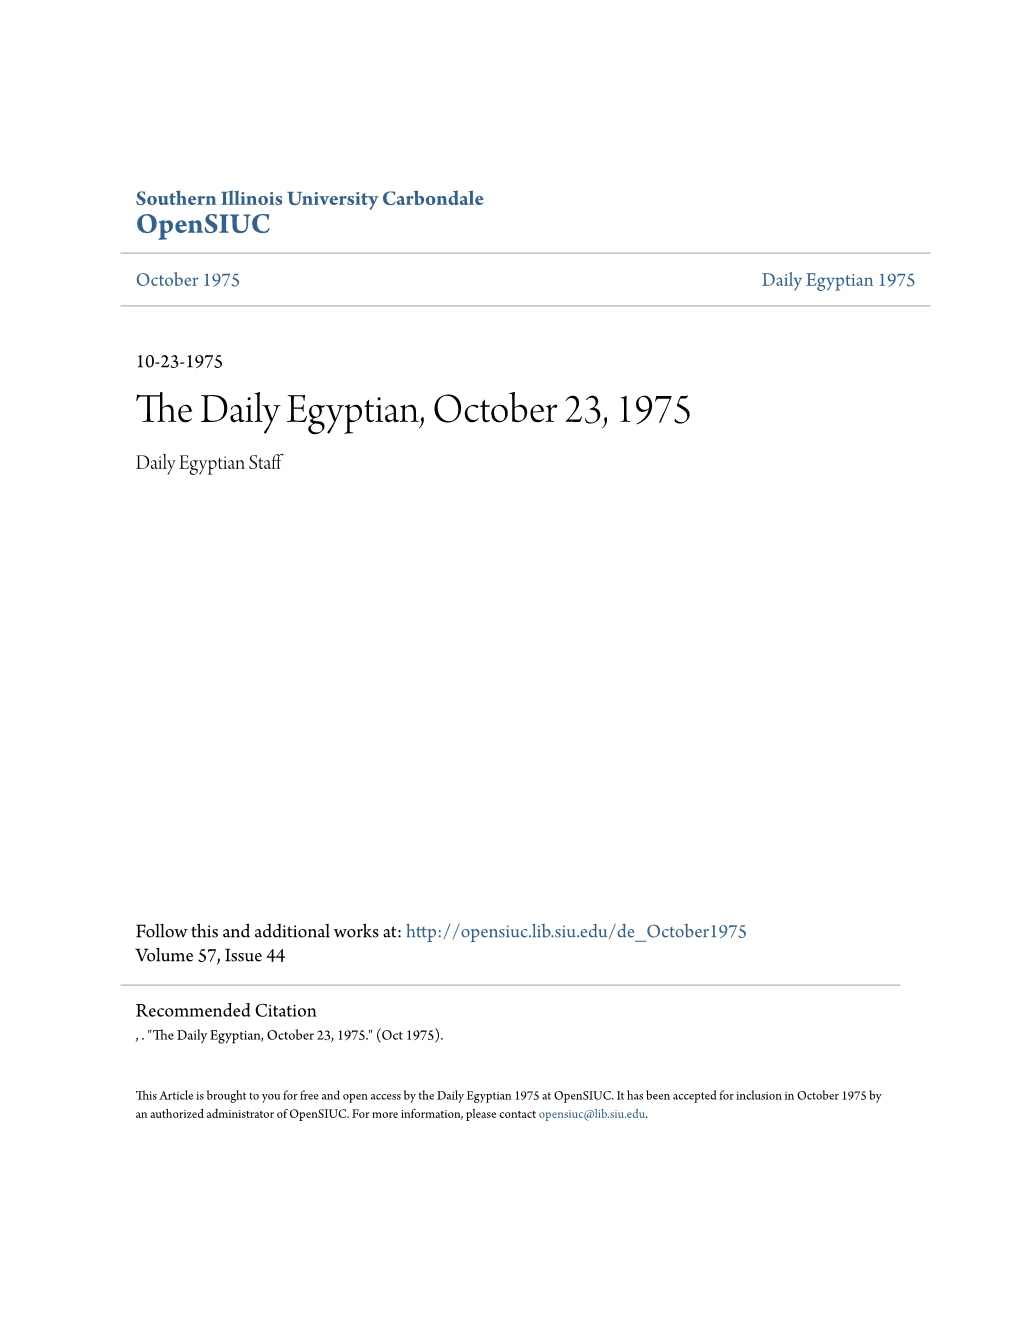 The Daily Egyptian, October 23, 1975